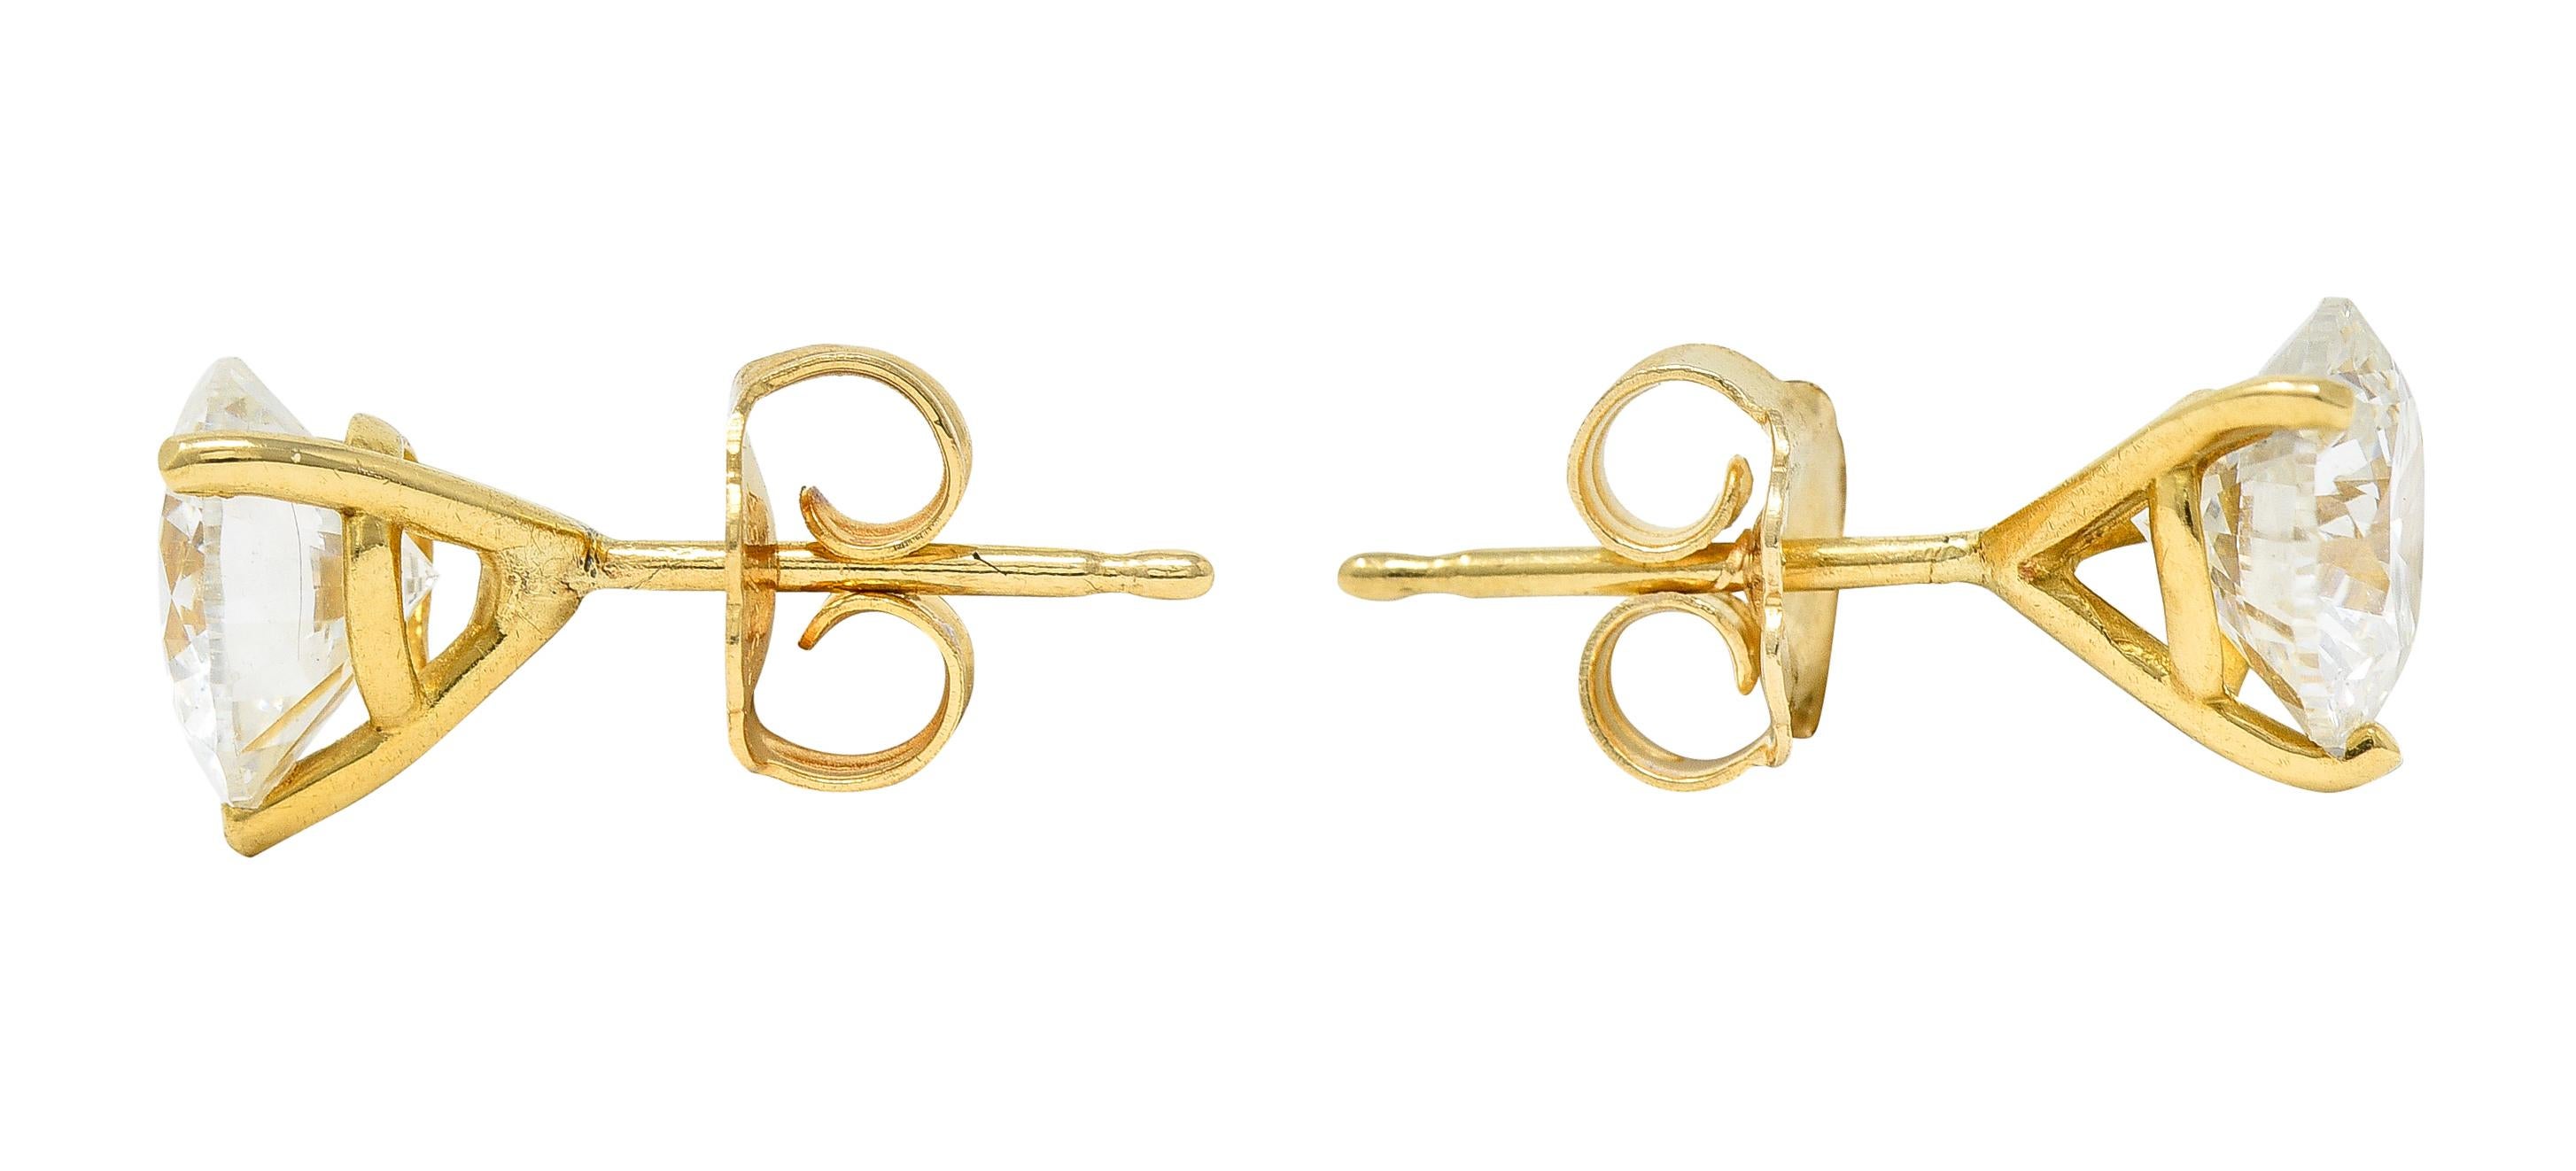 Stud earrings featuring round brilliant cut diamonds

Weighing in total approximately 1.92 carats with H/I color and SI clarity

Basket set in a martini style mounting

Completed by posts and friction backs

Tested as 18 karat gold

Circa: late 20th